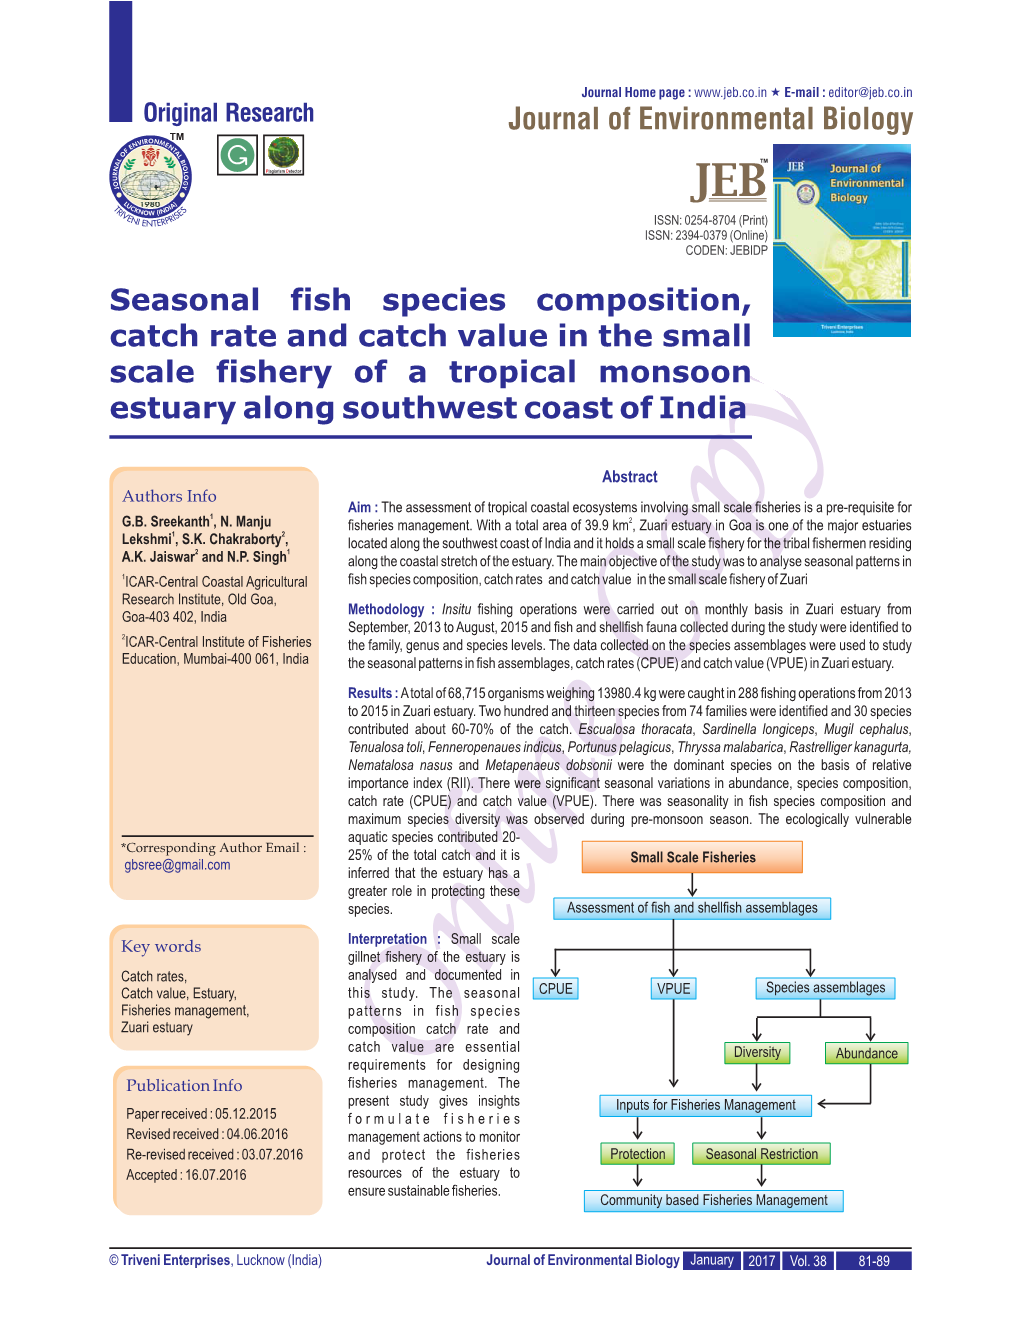 Seasonal Fish Species Composition, Catch Rate and Catch Value in the Small Scale Fishery of a Tropical Monsoon Estuary Along Southwest Coast of India